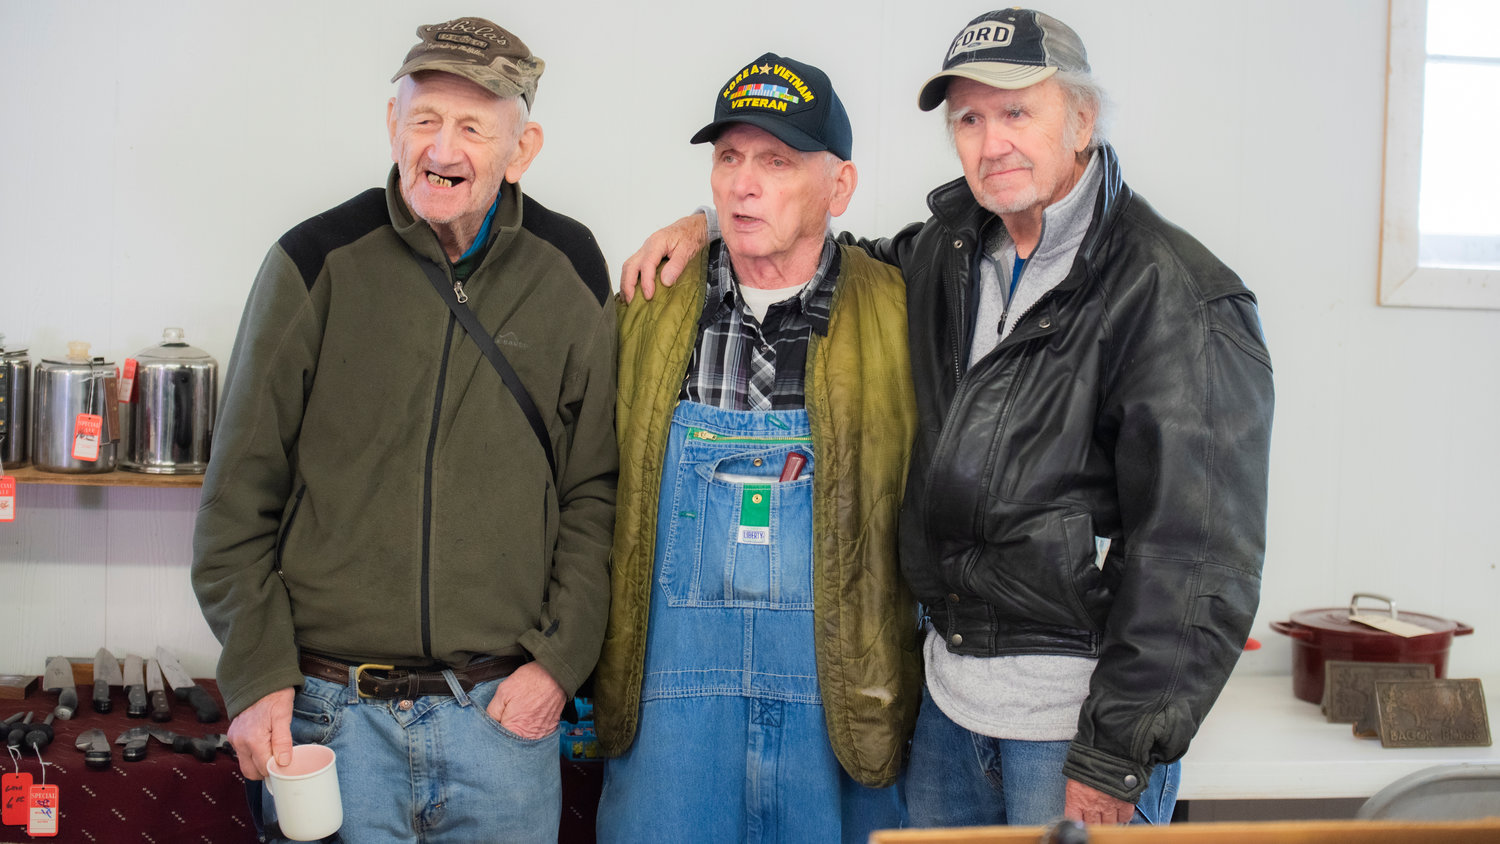 Burt Illig, 88, stands between fellow salesmen John Sheilds and Vern Webb during the Spring Community Garage Sale Saturday morning in Centralia. Illig is the oldest vendor and has been attending the garage sale at the Southwest Washington Fairgrounds for approximately 15 years as a vendor with help from his friends.